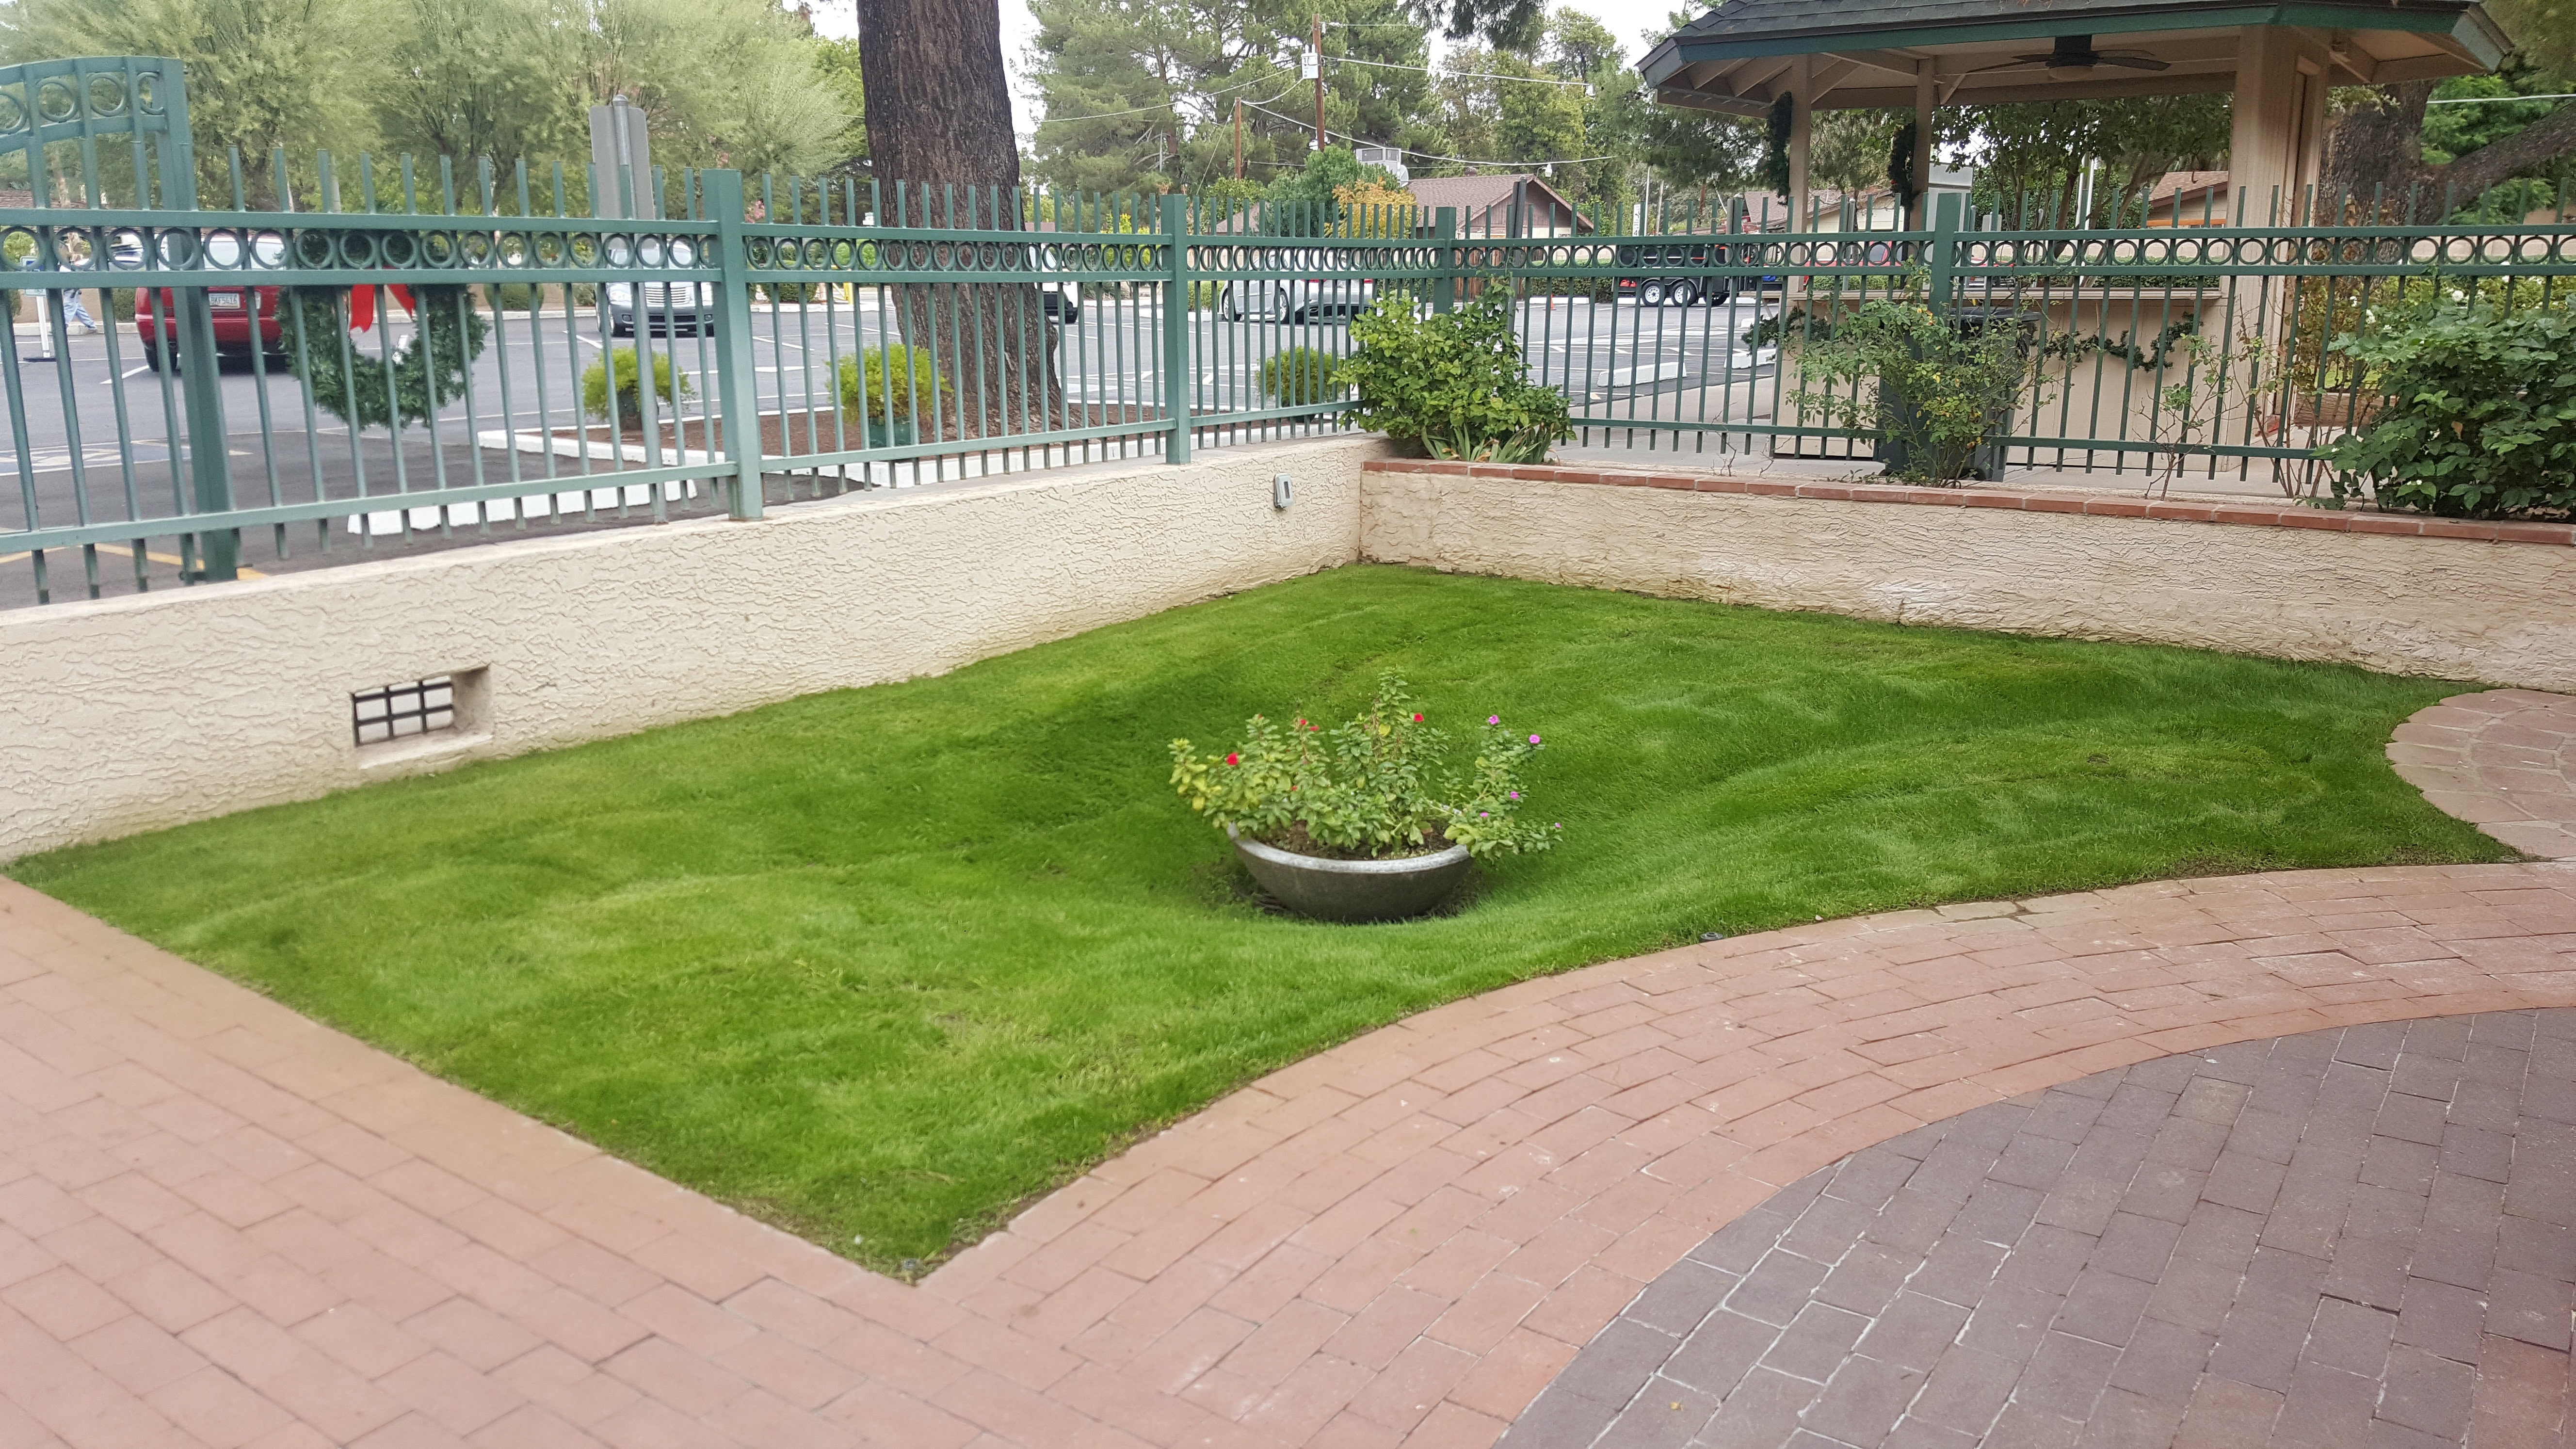 Lawn Care Service in Paradise Valley Arizona